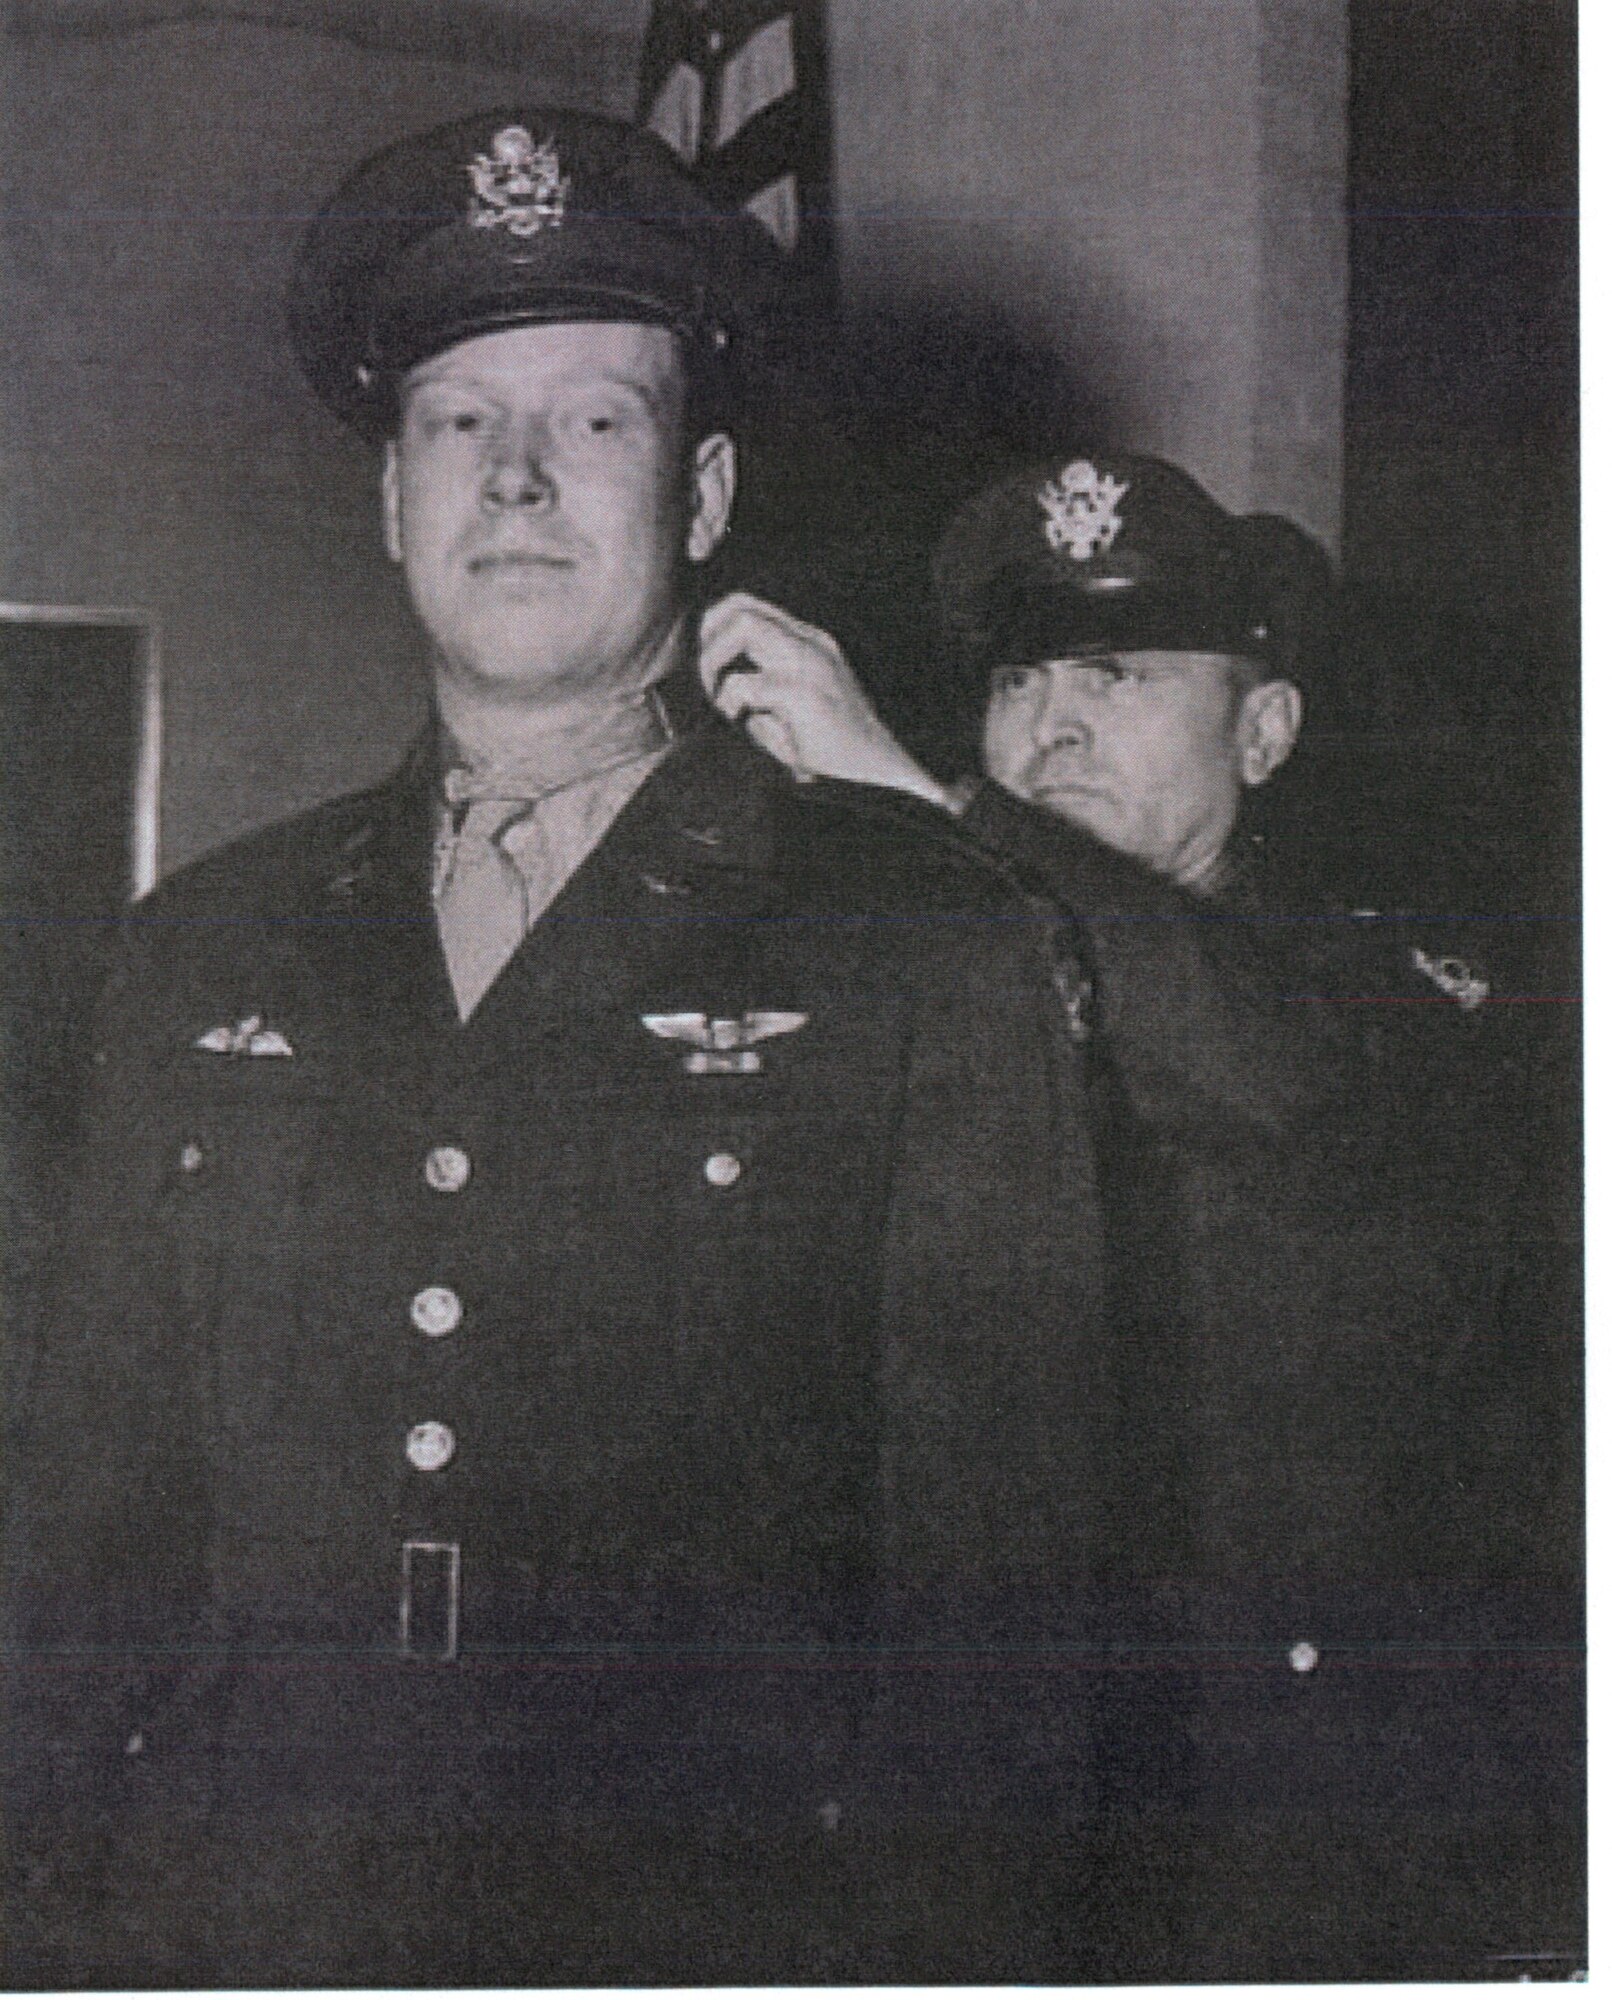 2nd Lt. John C. “Red” Morgan is presented the Medal of Honor by Gen. Ira C. Eaker after returning an unbelievably damaged B-17 Flying Fortress and crew home following a bombing mission with fatal ramifications over Germany during World War II, Dec. 18, 1943. (U.S. Air Force photo)